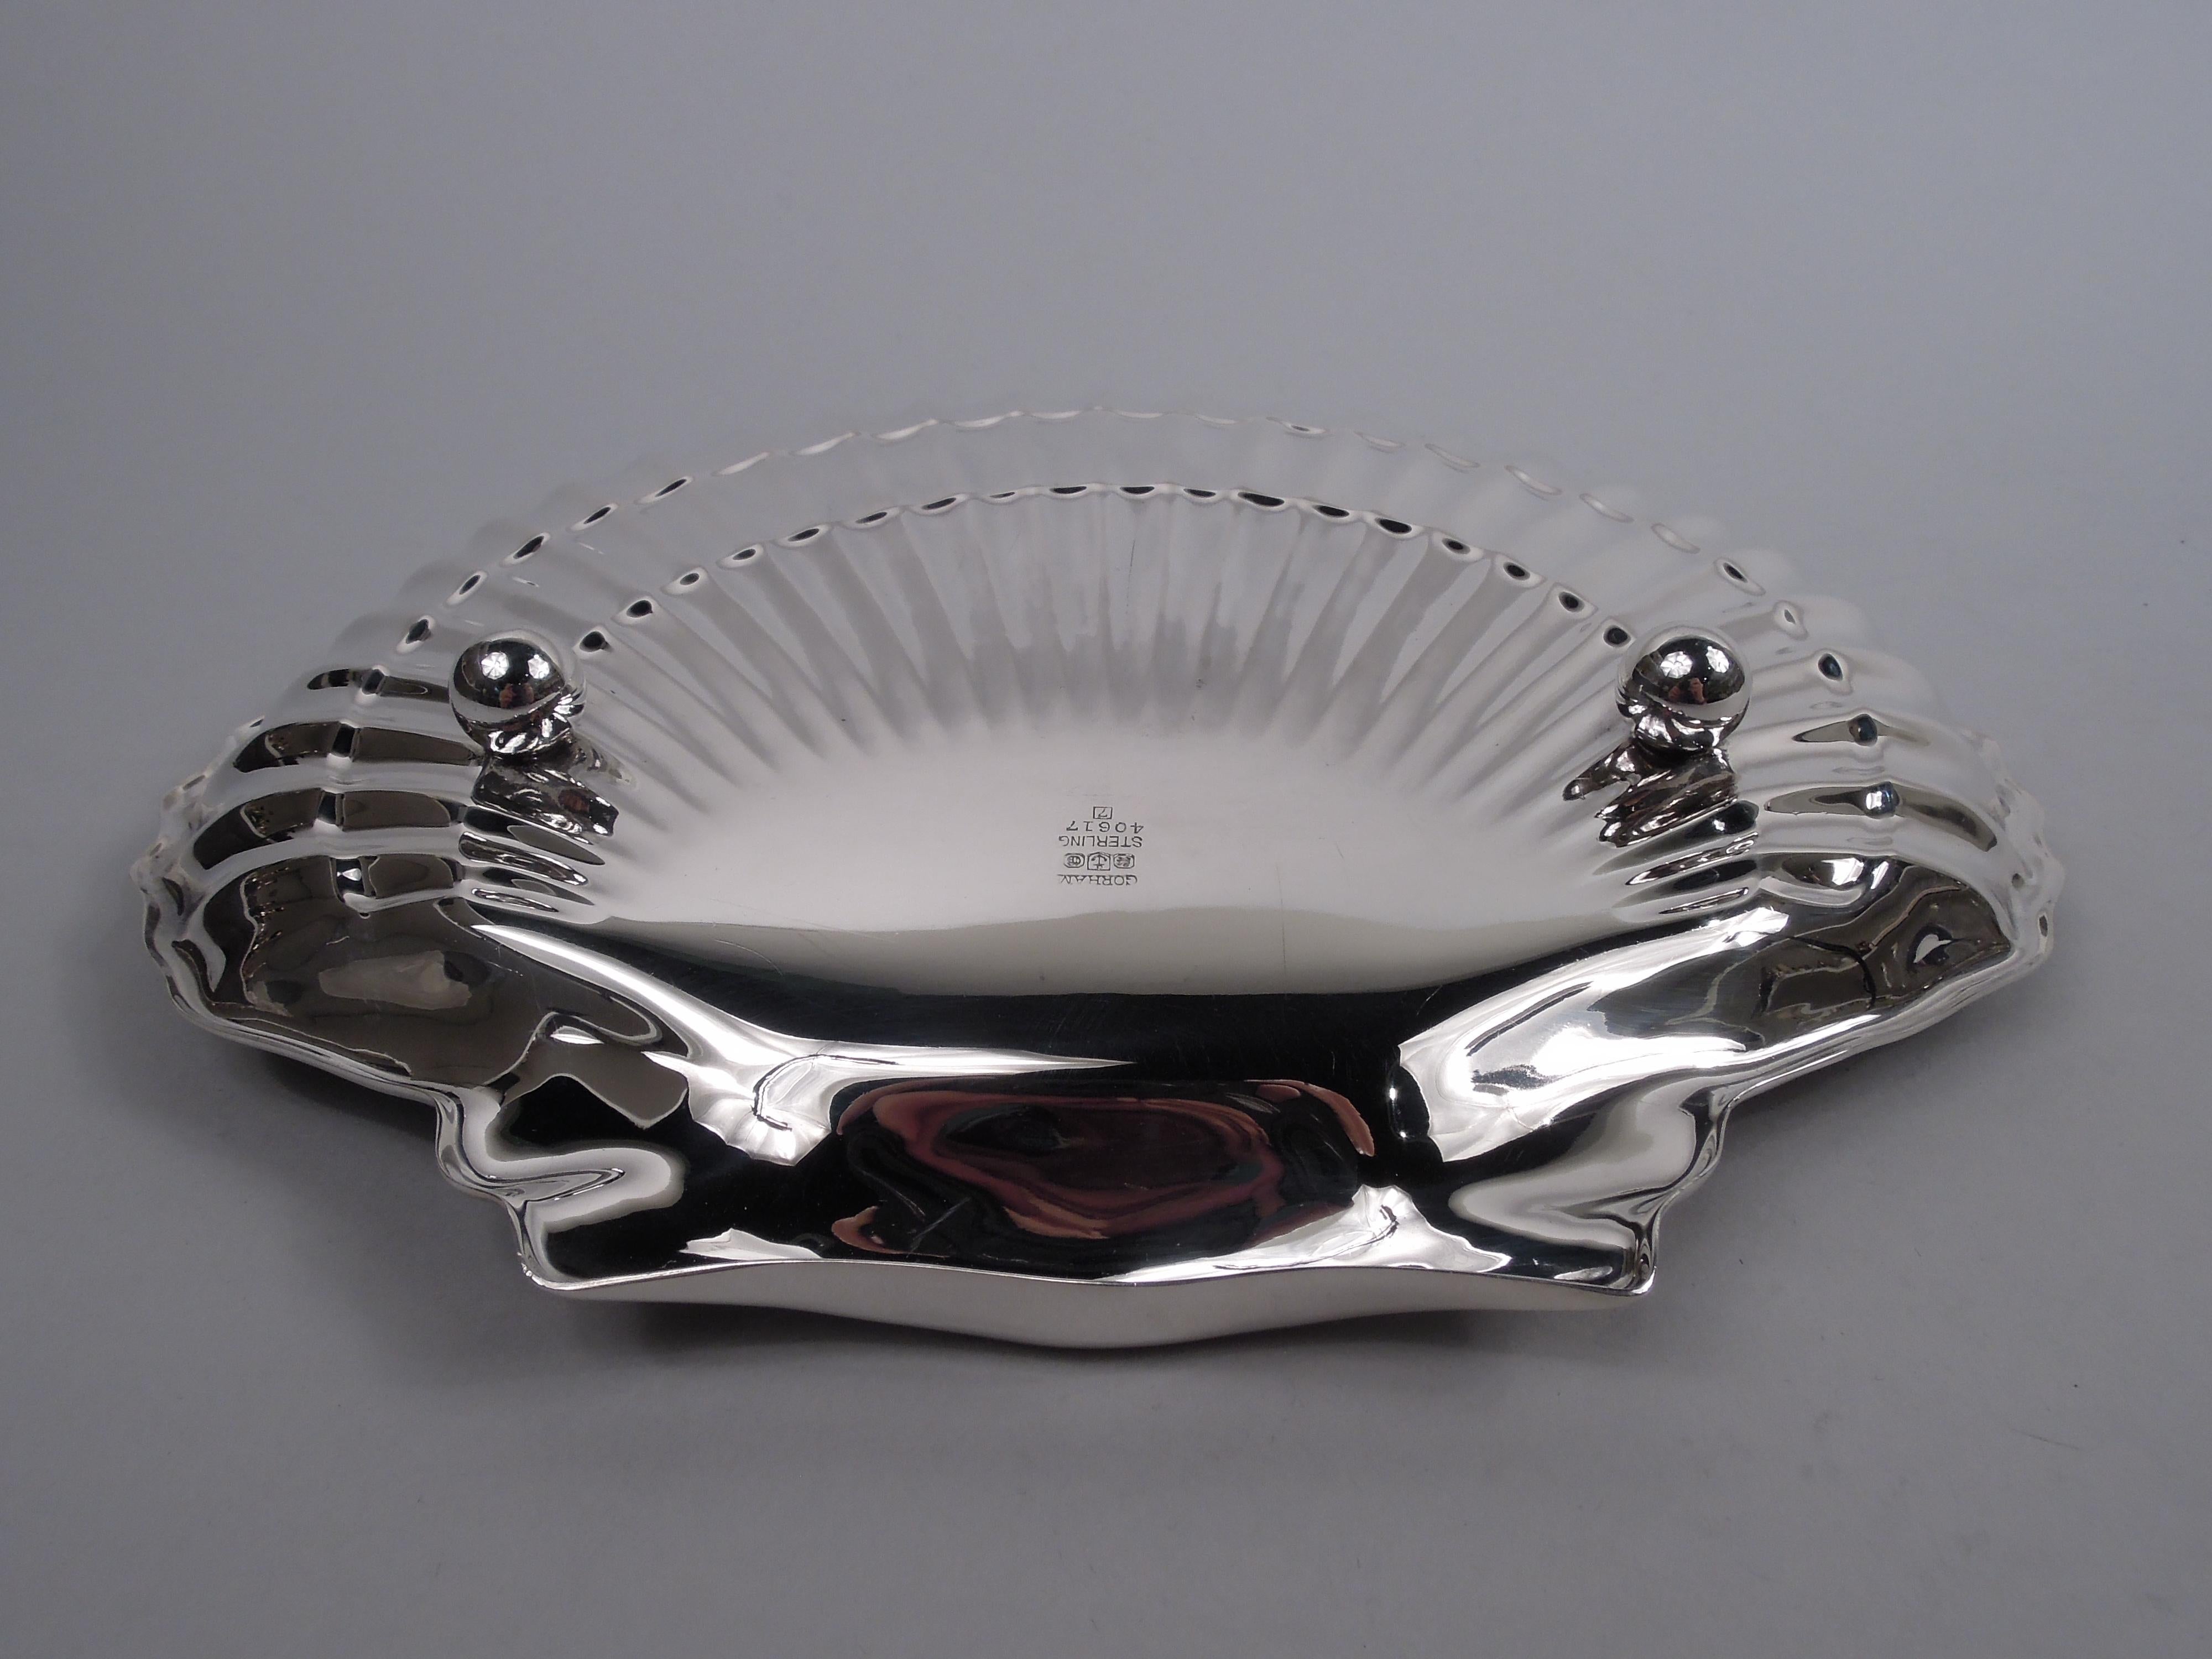 Large Gorham Modern Classical Sterling Silver Scallop Shell Dish, 1947 For Sale 4